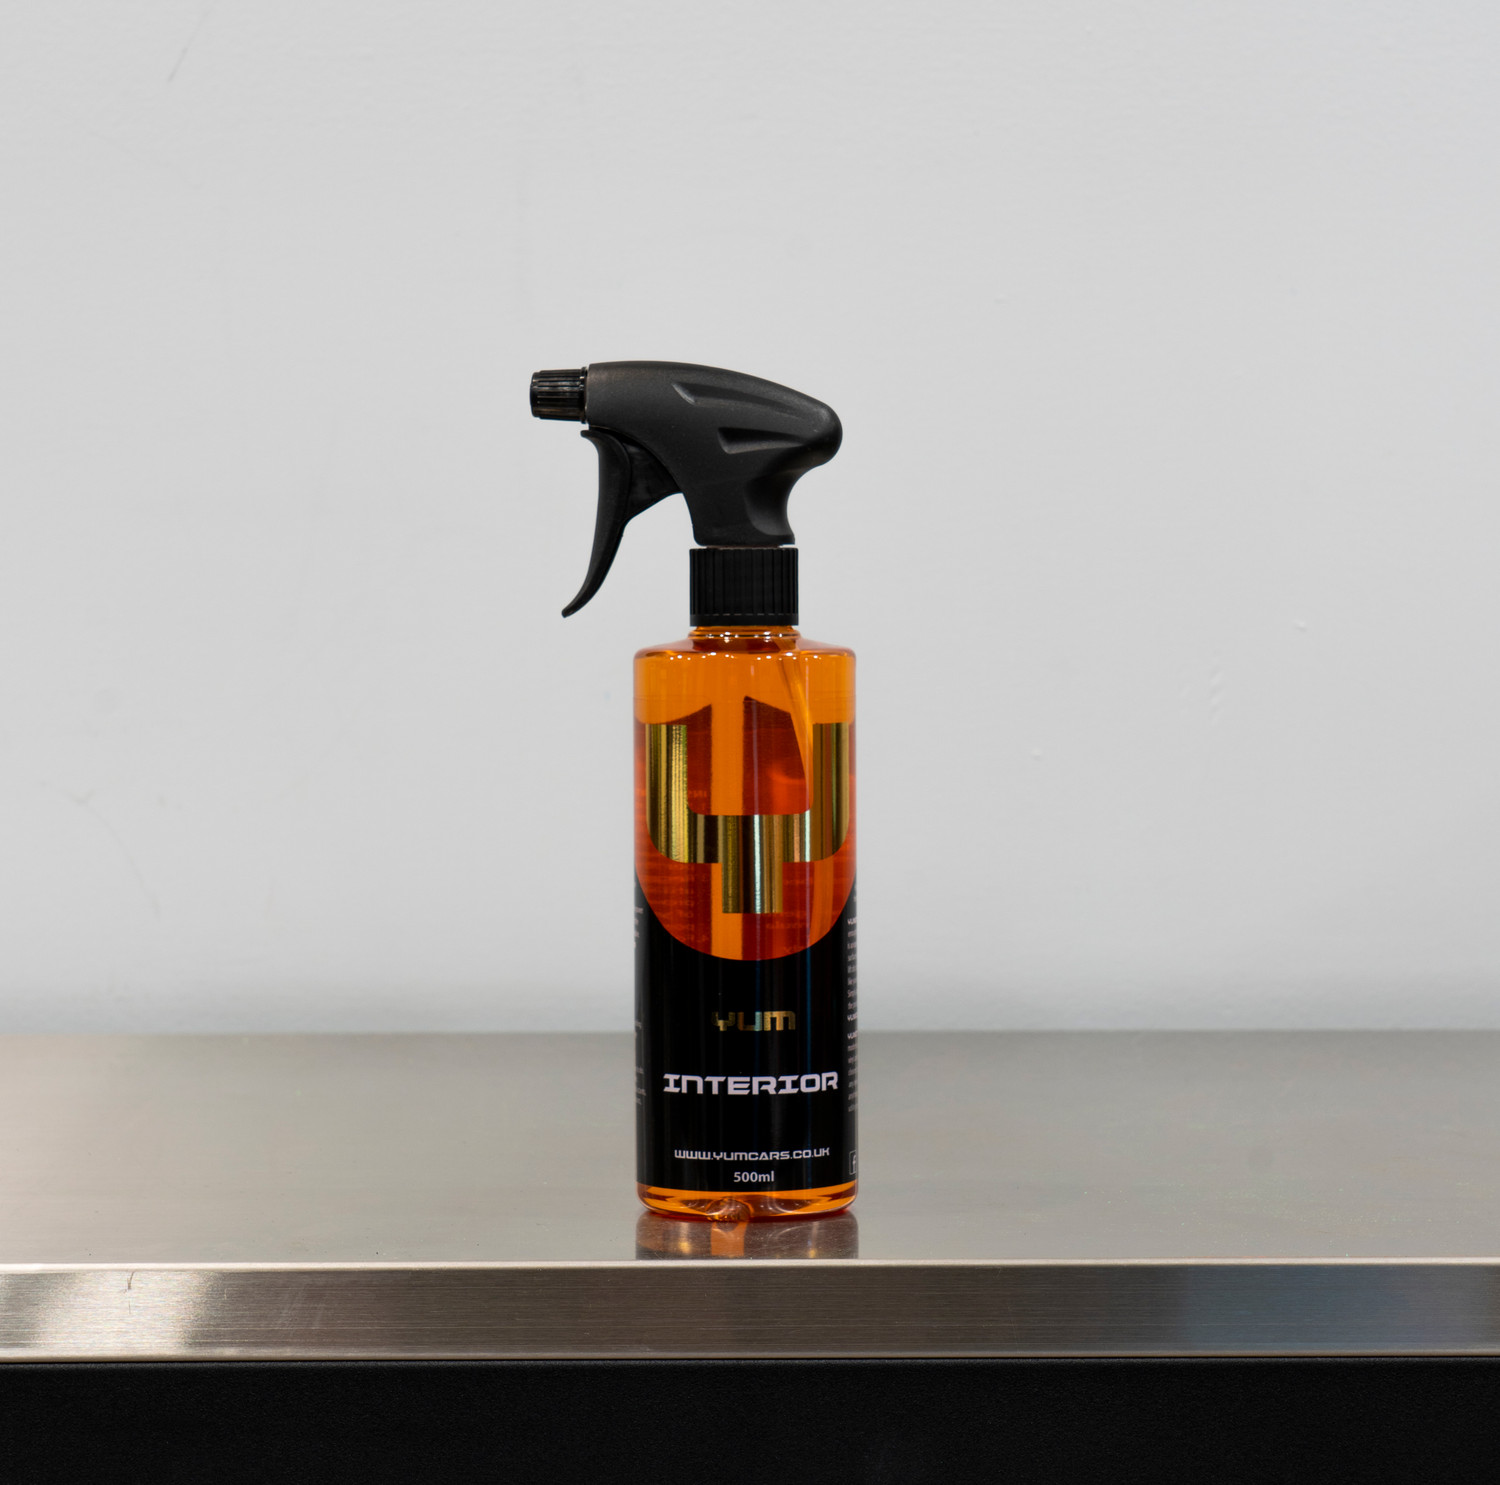 Leather Cleaner For Car 500ml Effective Car Interior Cleaner